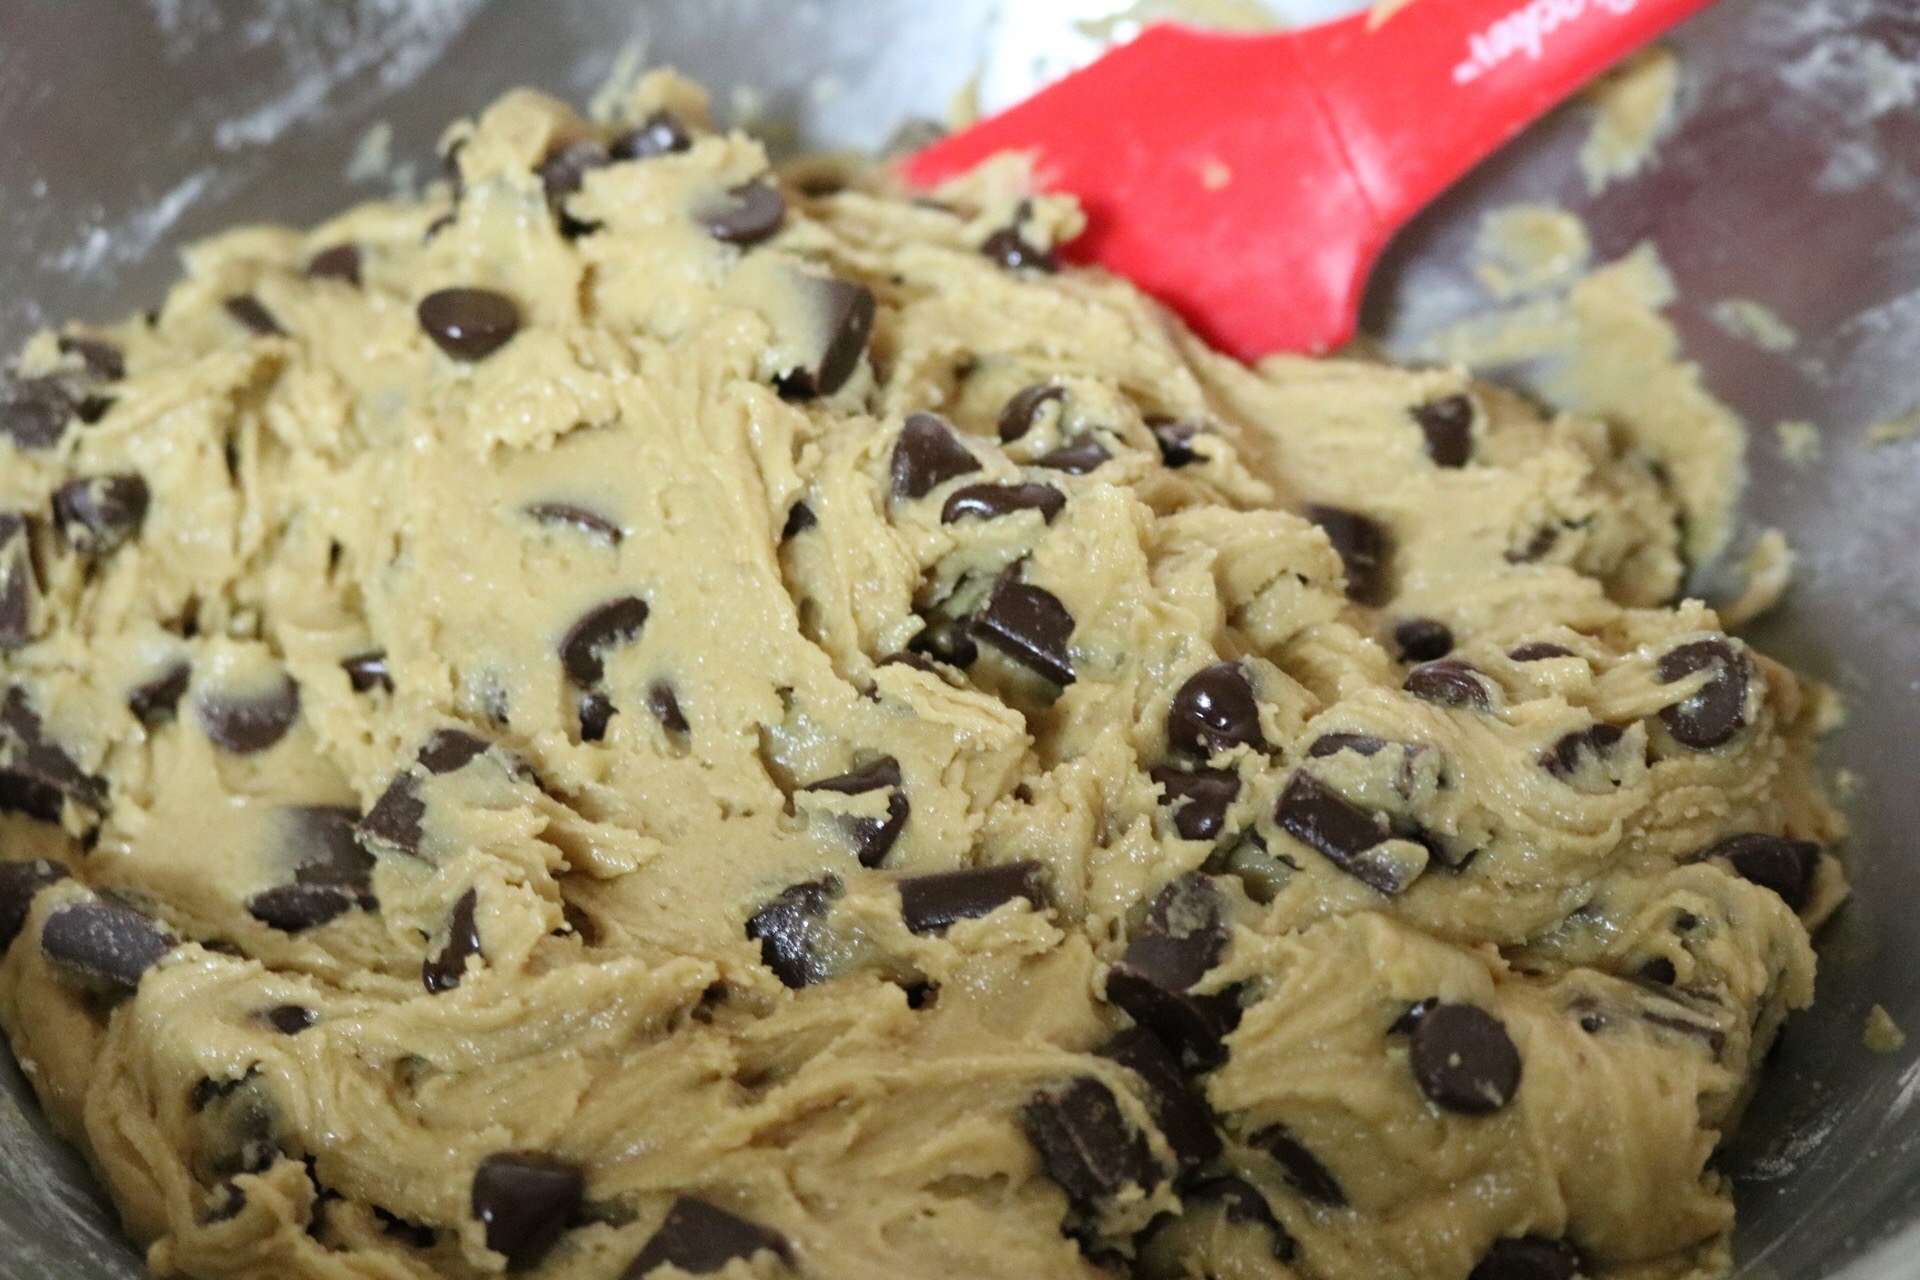 A close-up of the dough with chocolate chips and chocolate chunks incorporated throughout